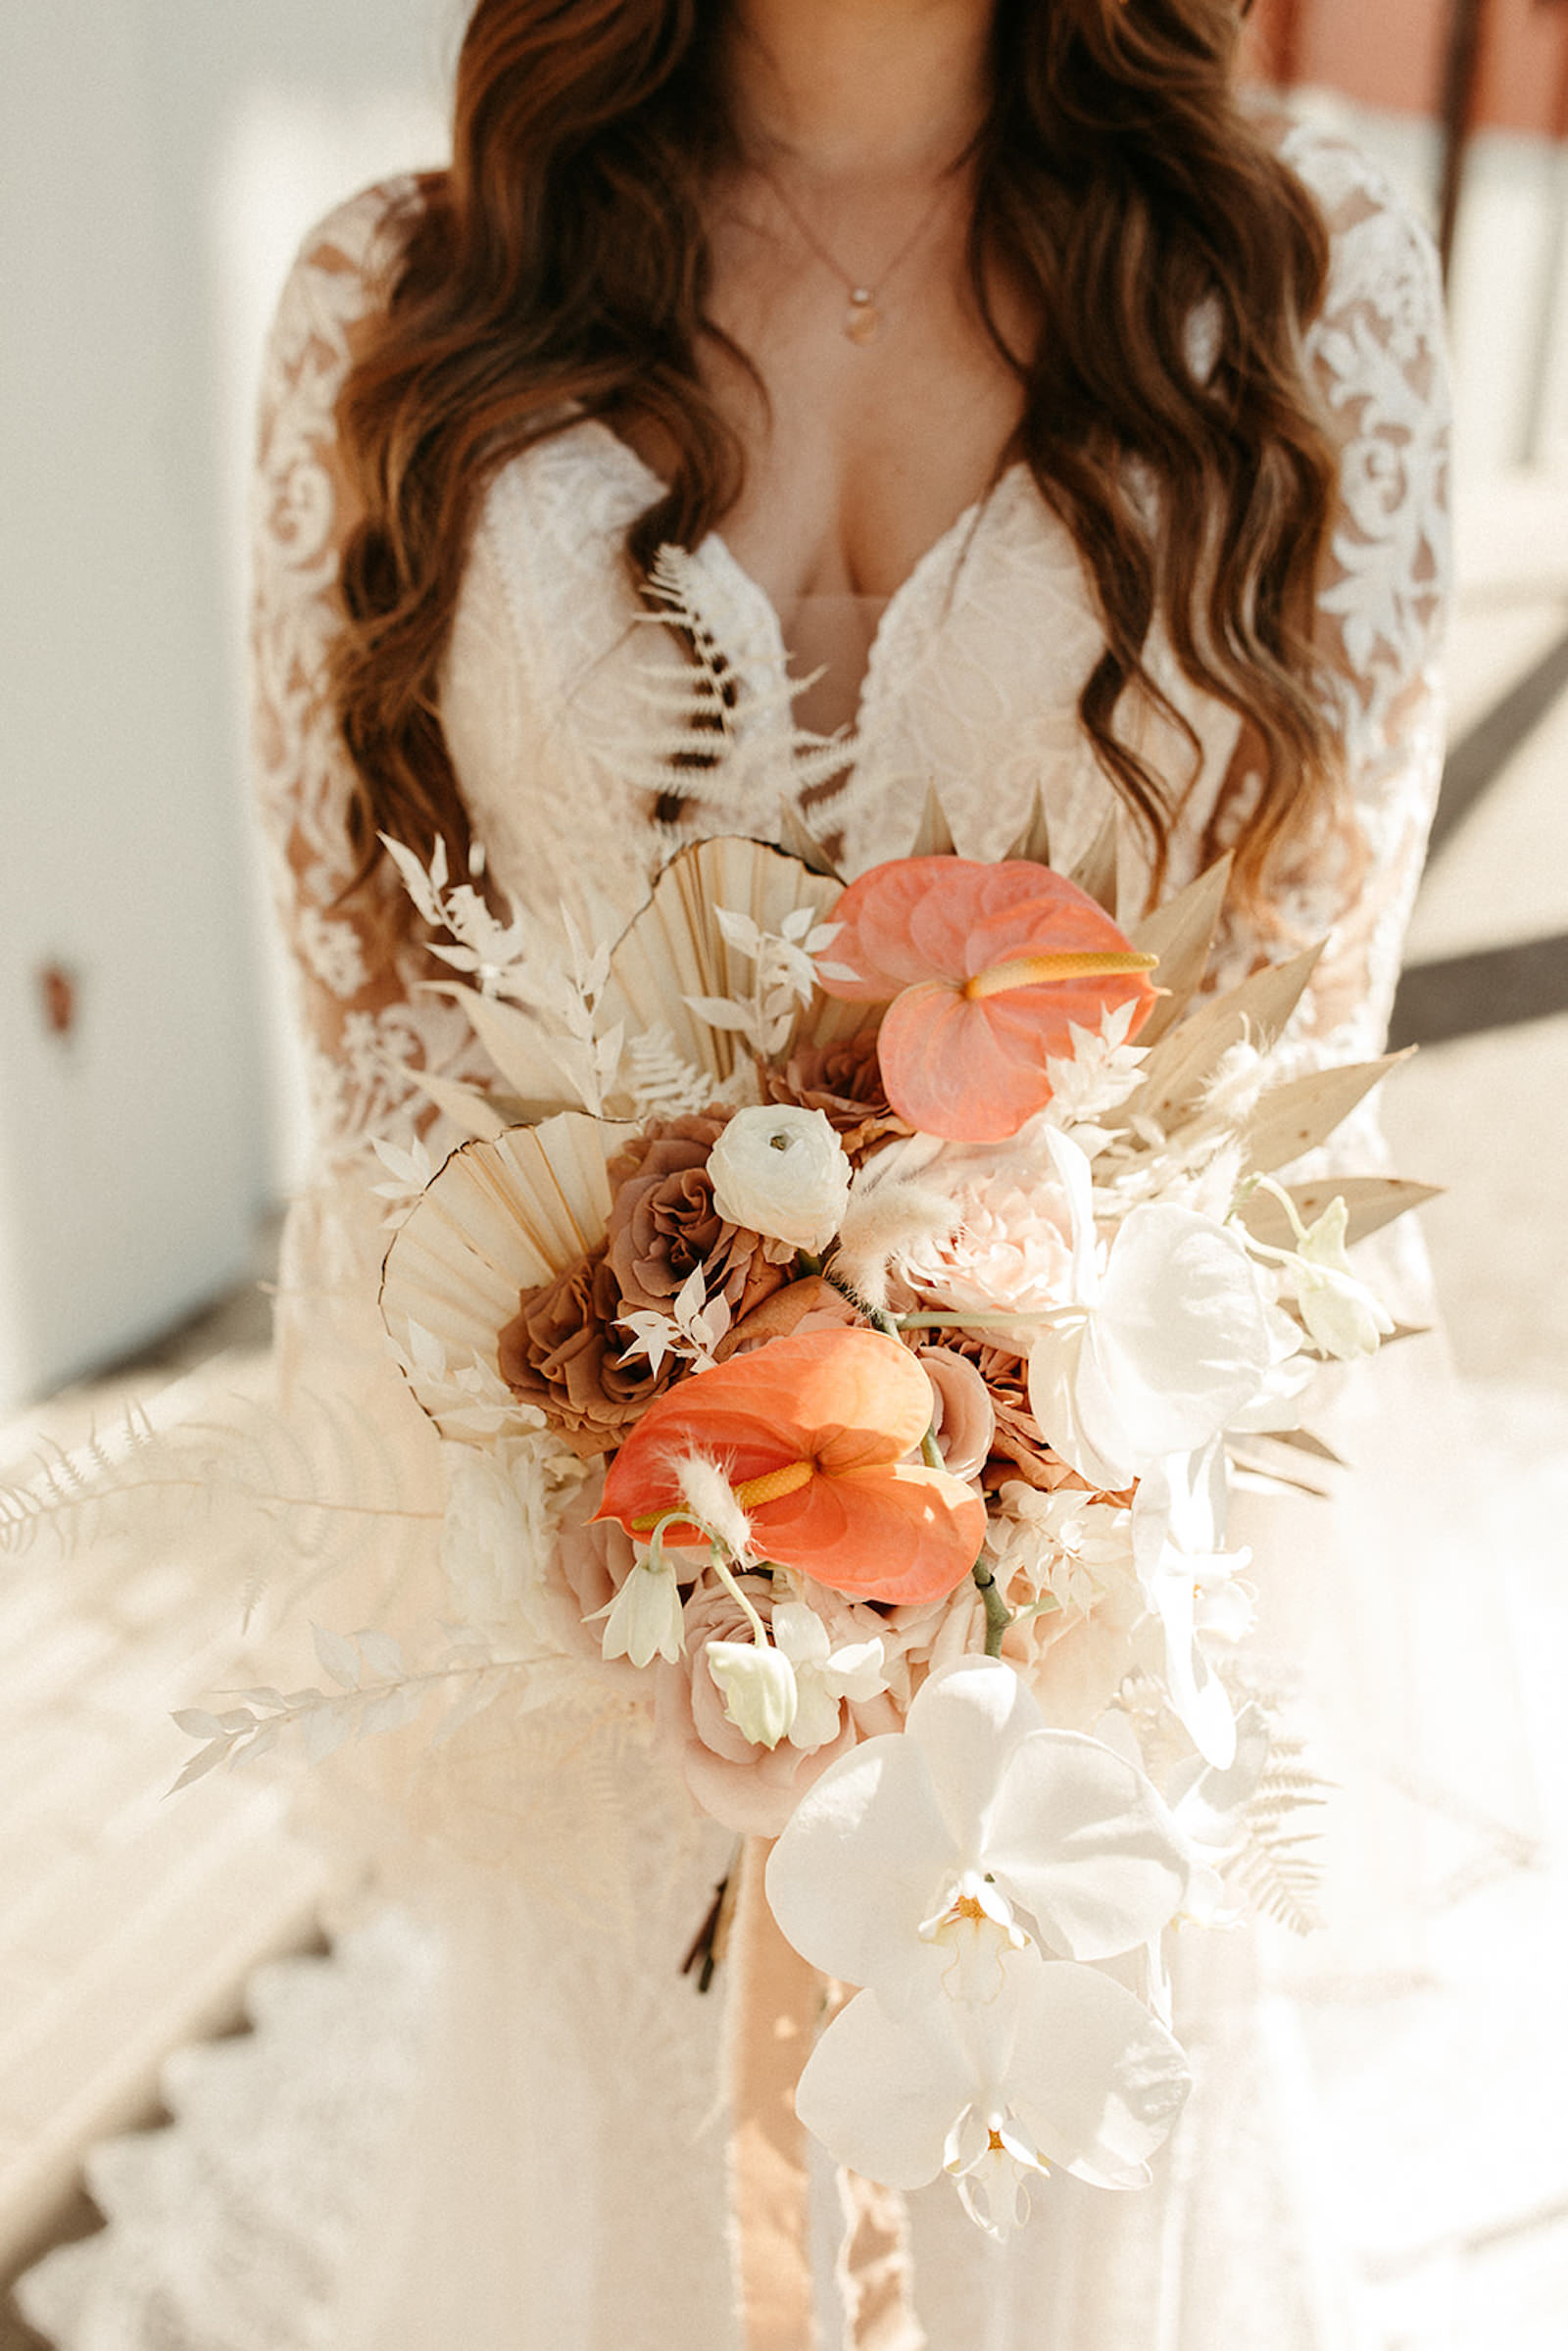 Earthy Neutral Boho Modern Chic Bridal Portrait Holding Lush White Orchids, Tropical Pink Anthurium, Mauve Roses, Dried Leaves Floral Bouquet | Tampa Bay Wedding Florist Save the Date Florida